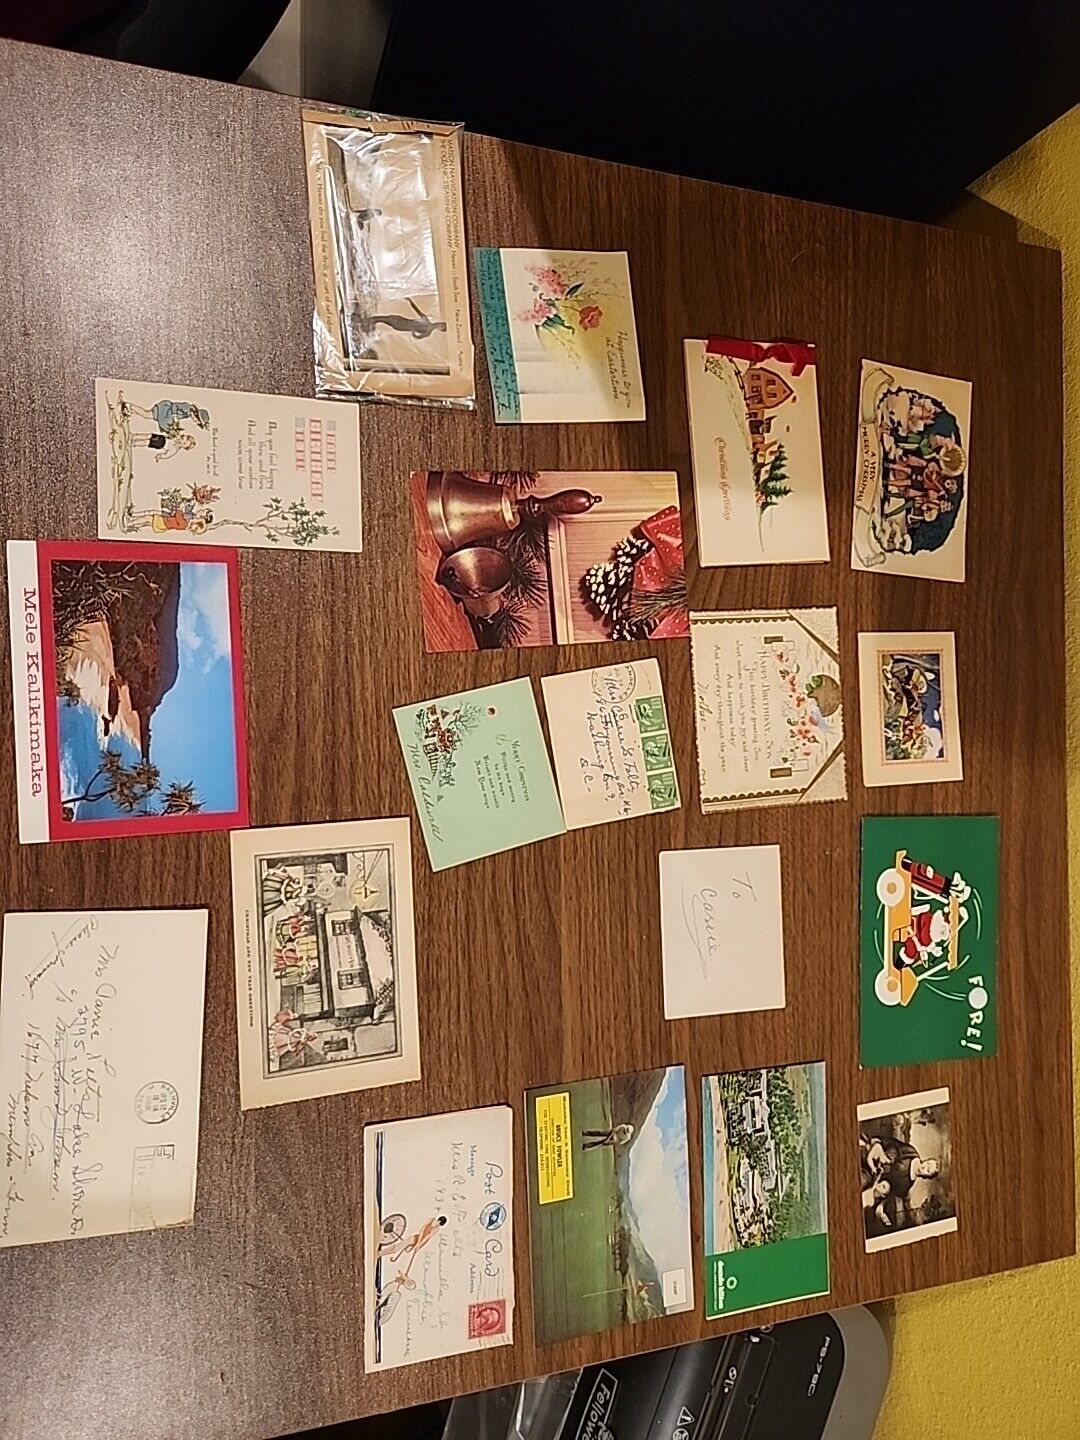 Lot of antique post cards and greeting cards